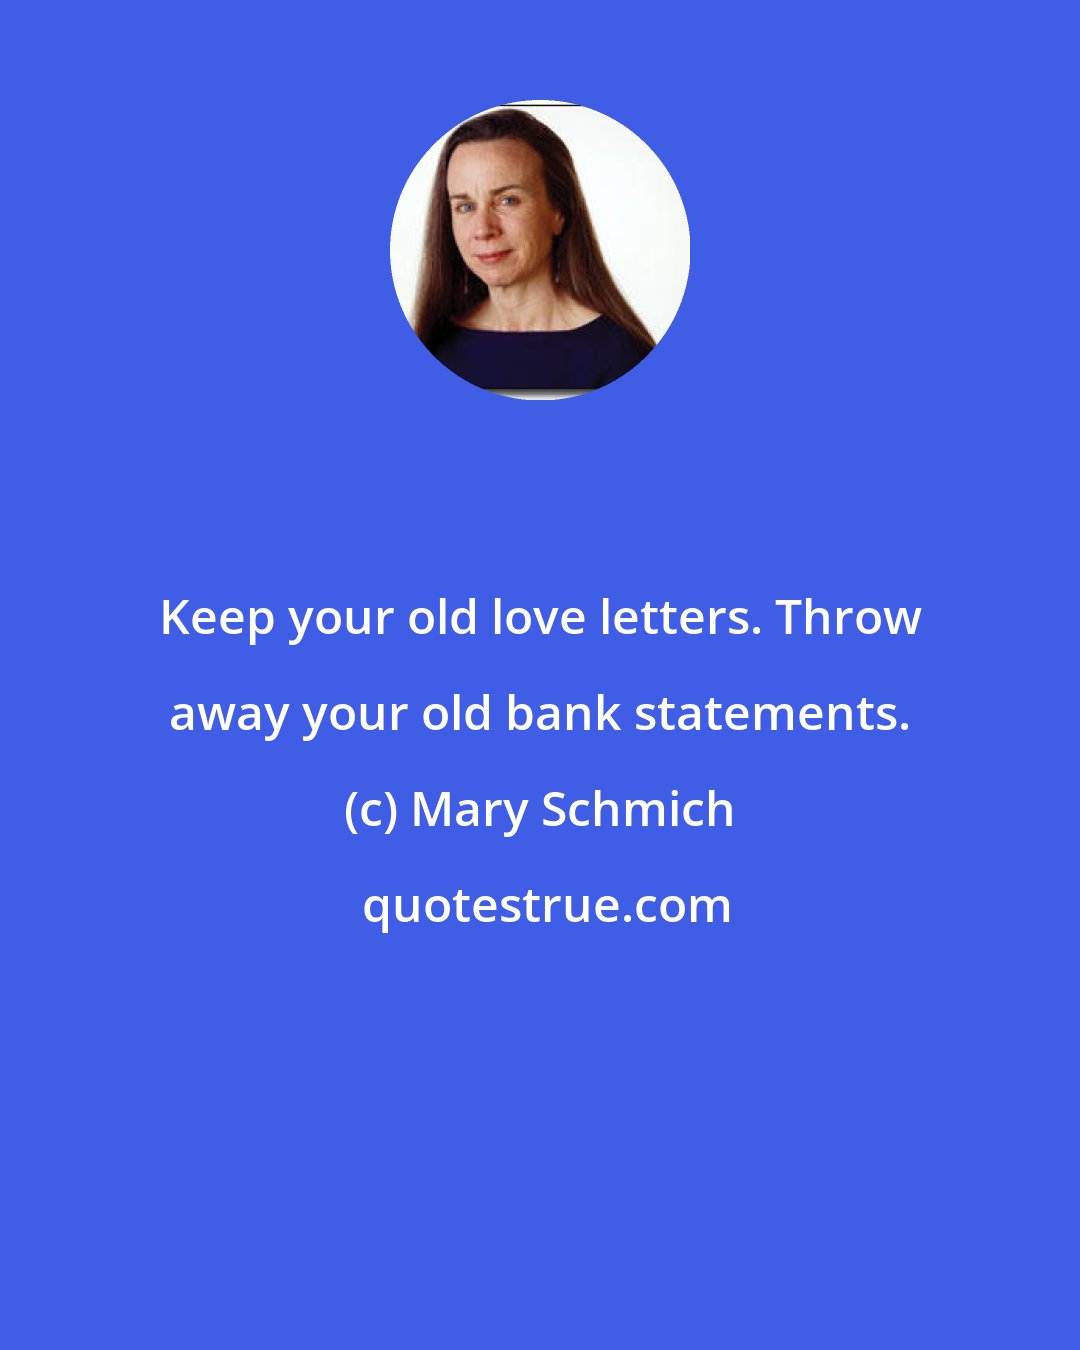 Mary Schmich: Keep your old love letters. Throw away your old bank statements.